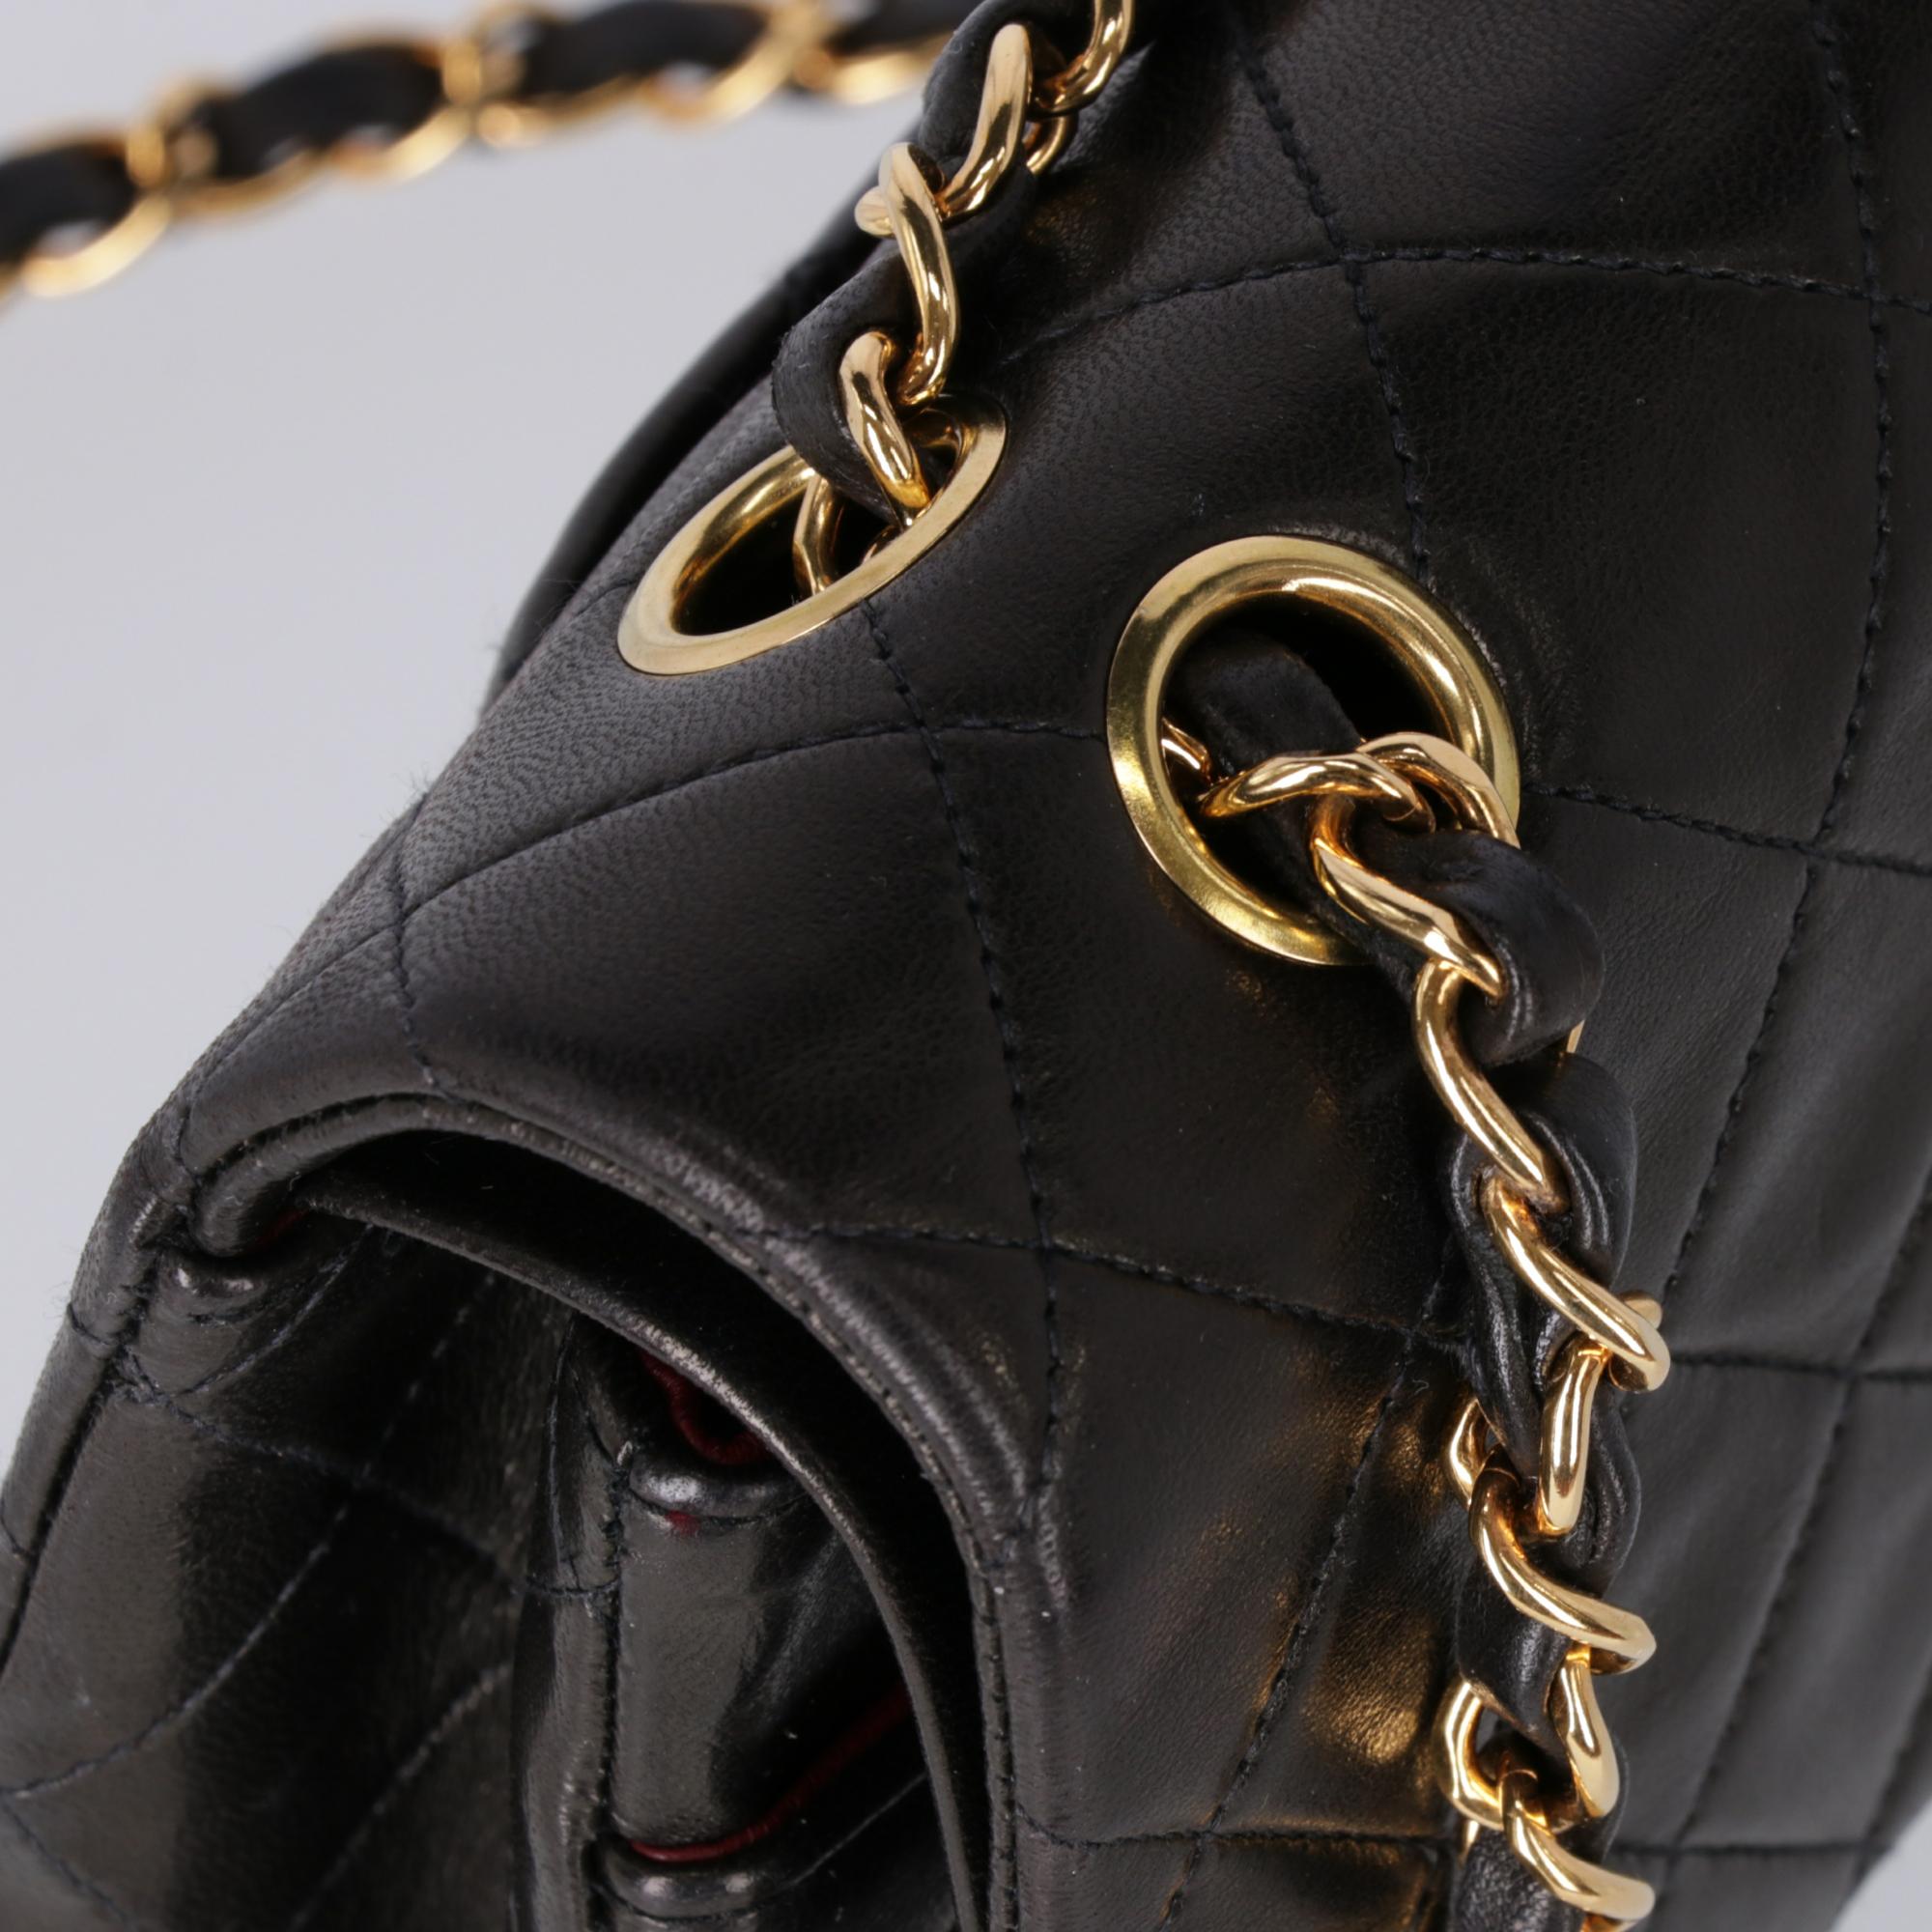 1990s Chanel 2.55 Black Leather Bag 25 cm With Chain 4